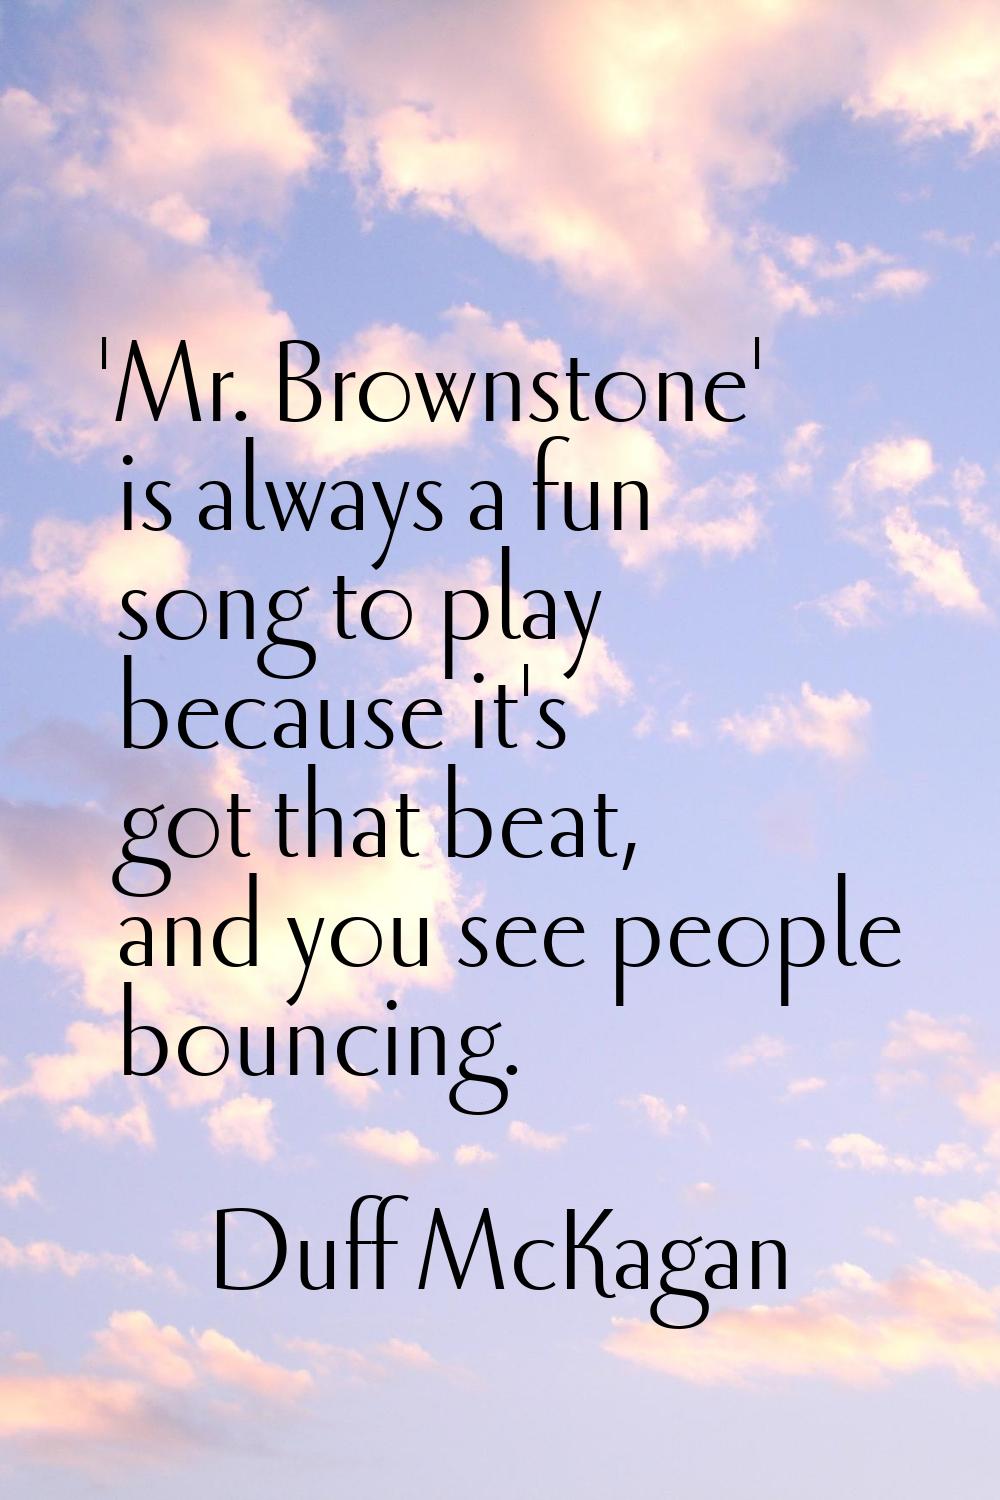 'Mr. Brownstone' is always a fun song to play because it's got that beat, and you see people bounci